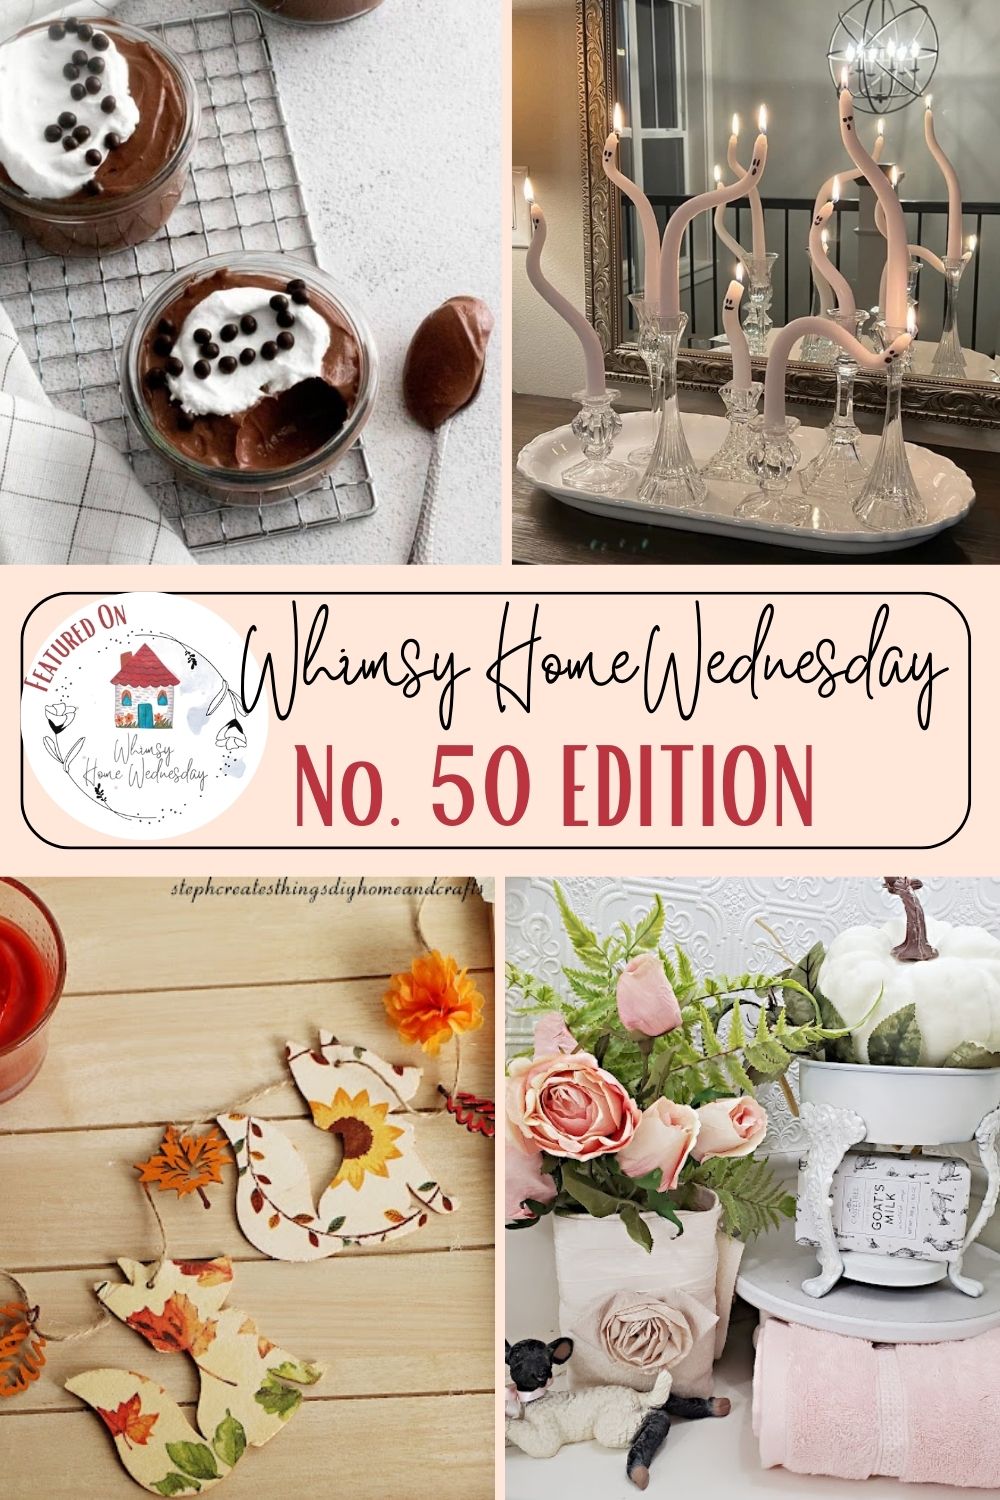 Join us on Whimsy Home Wednesday Blog Link Party No. 50 and see host projects, the features from the previous week and link up your posts!